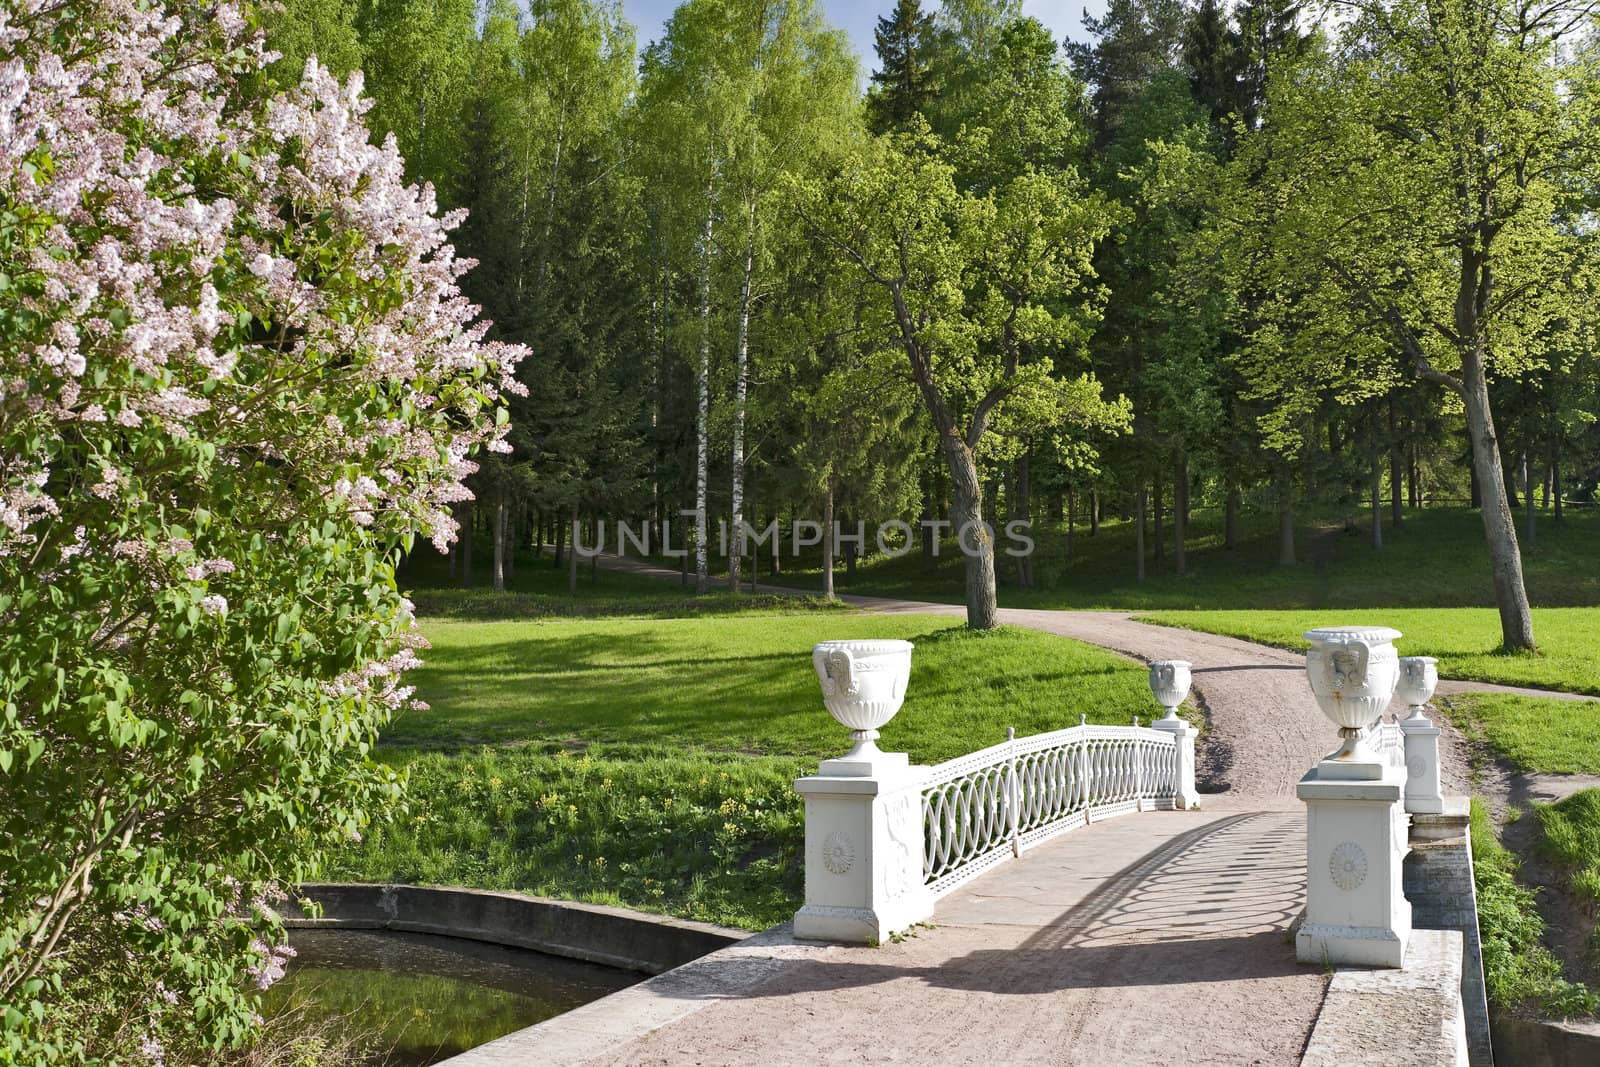 Bridge with vases and blossoming lilac in the park